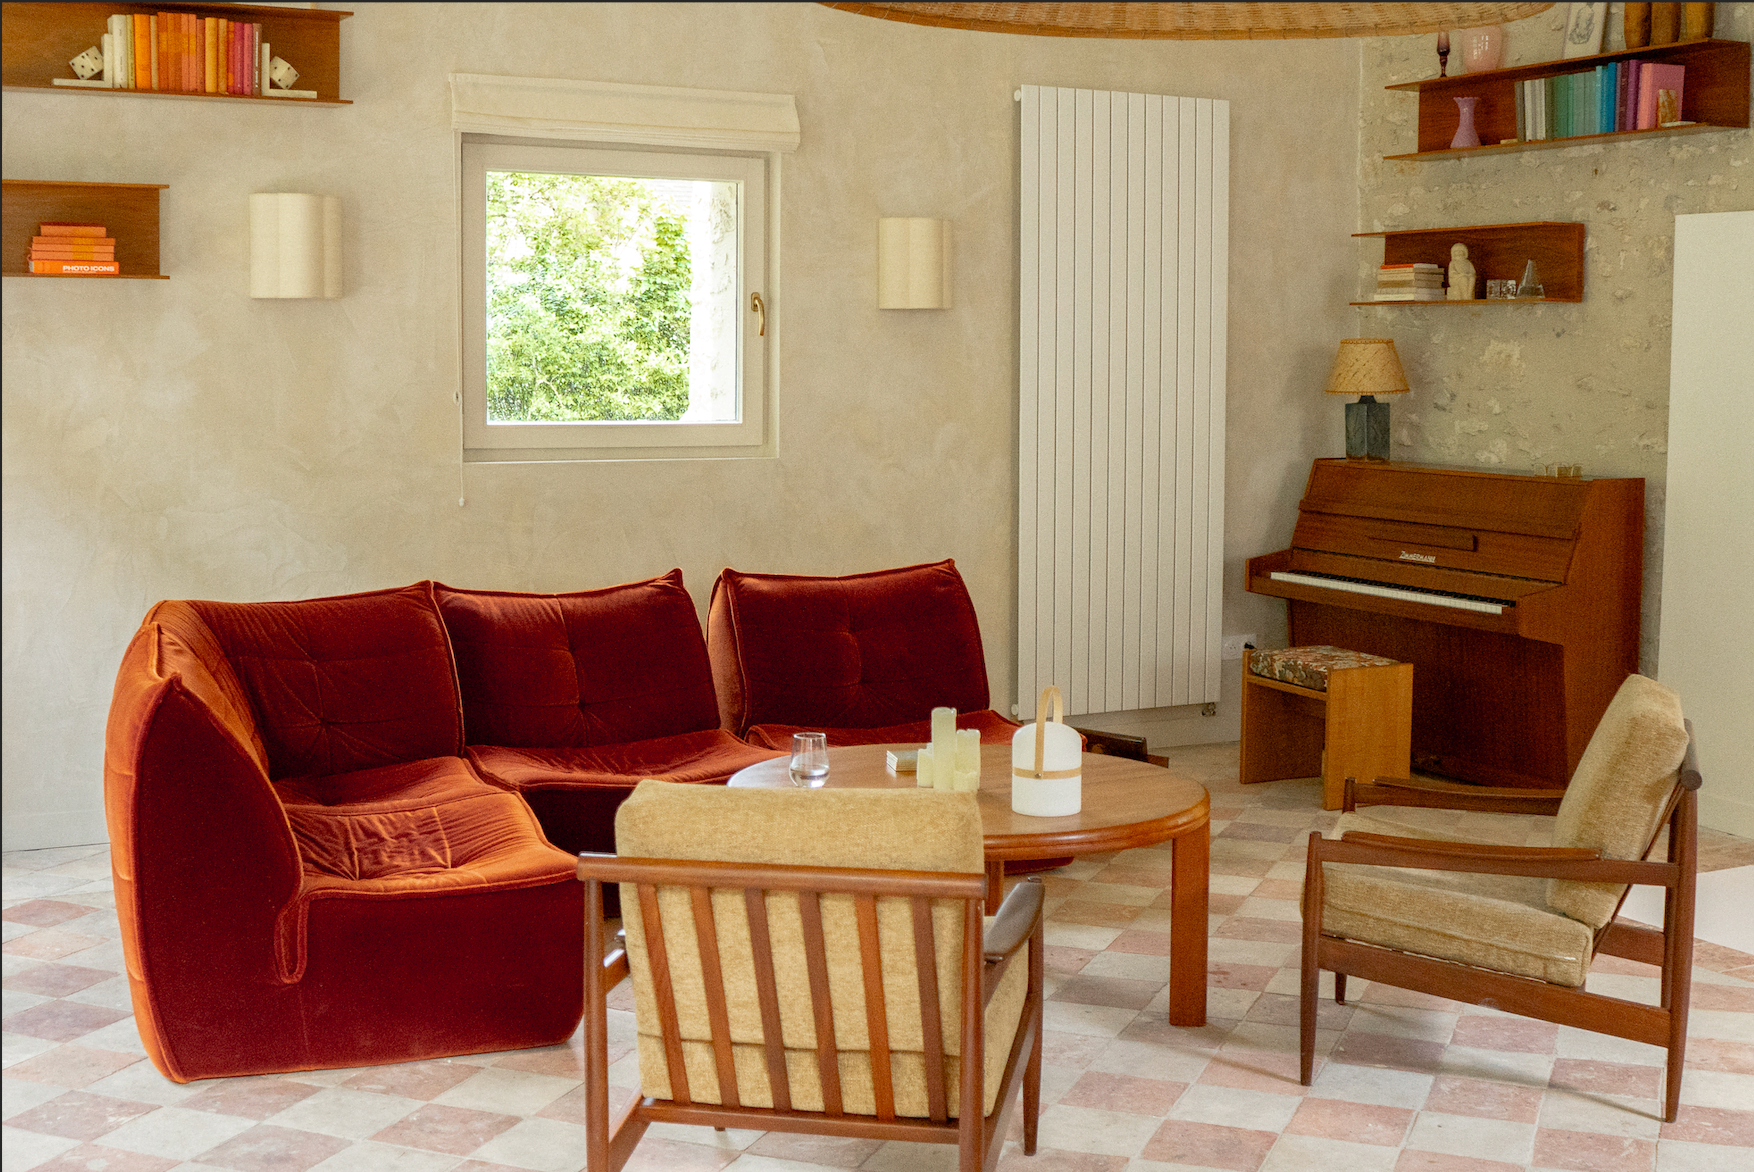 The living room of La Source: wooden armchairs and red sofas